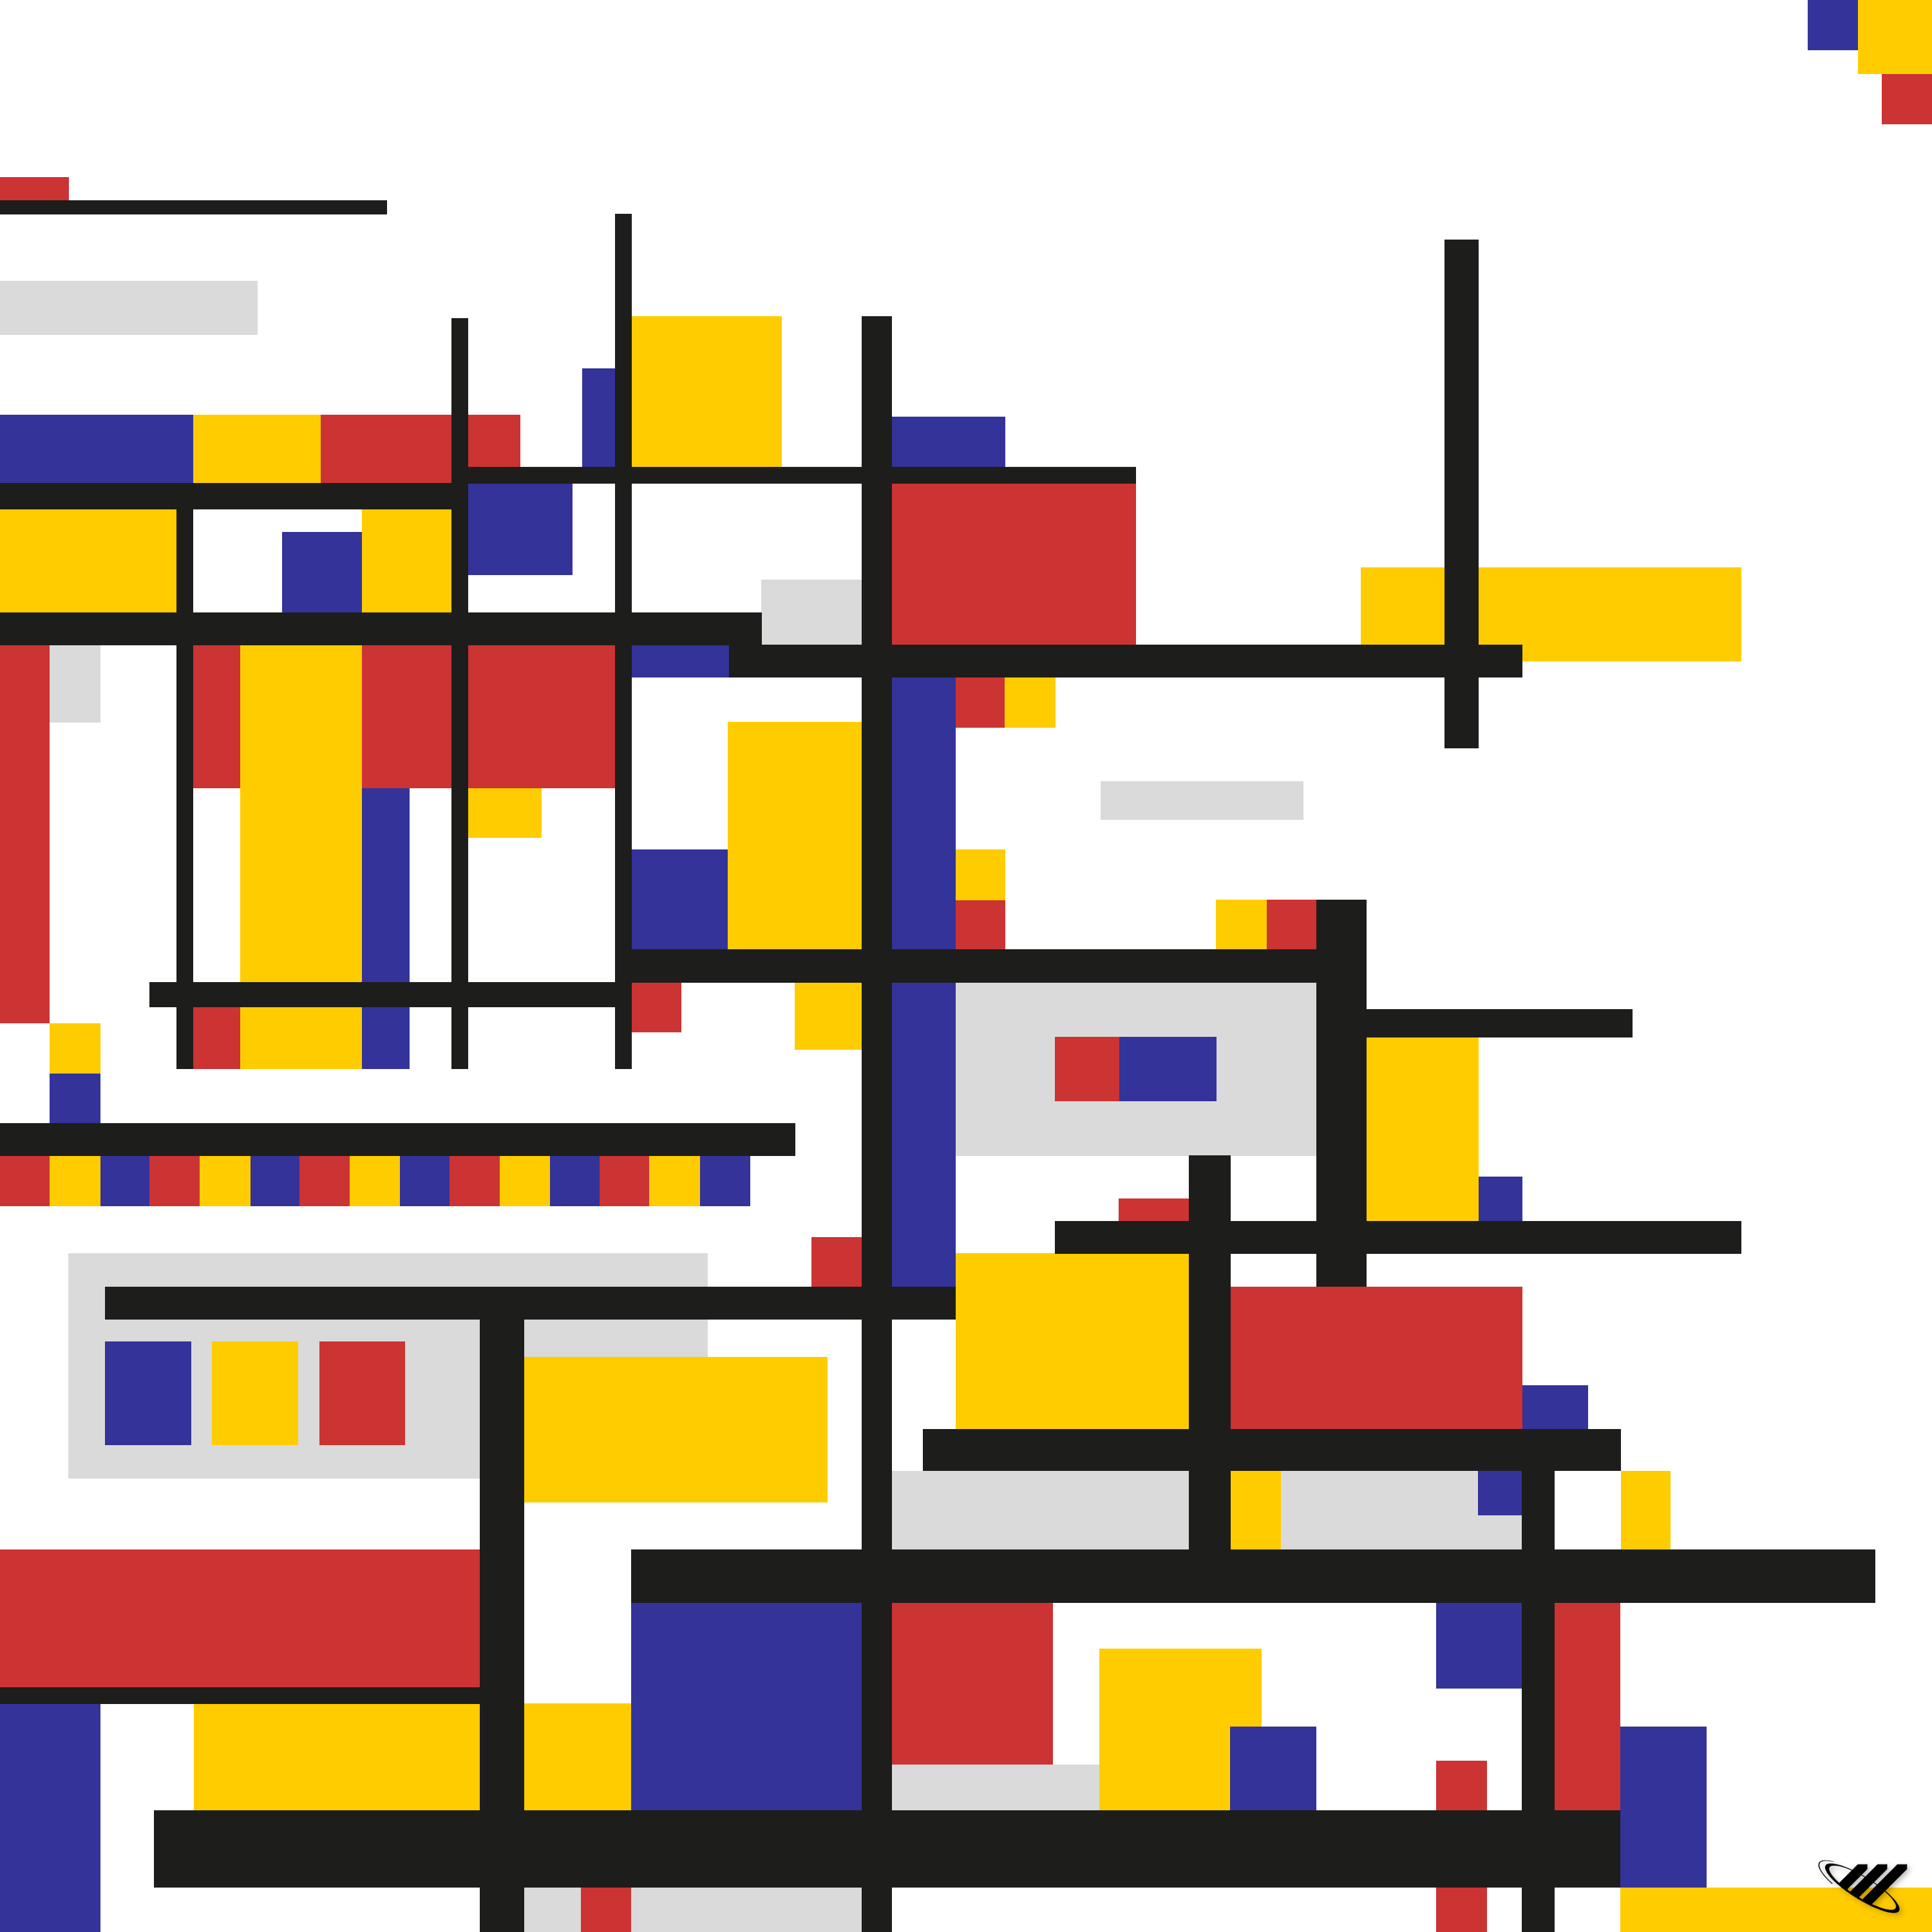 Squares and lines in style of De Stijl.